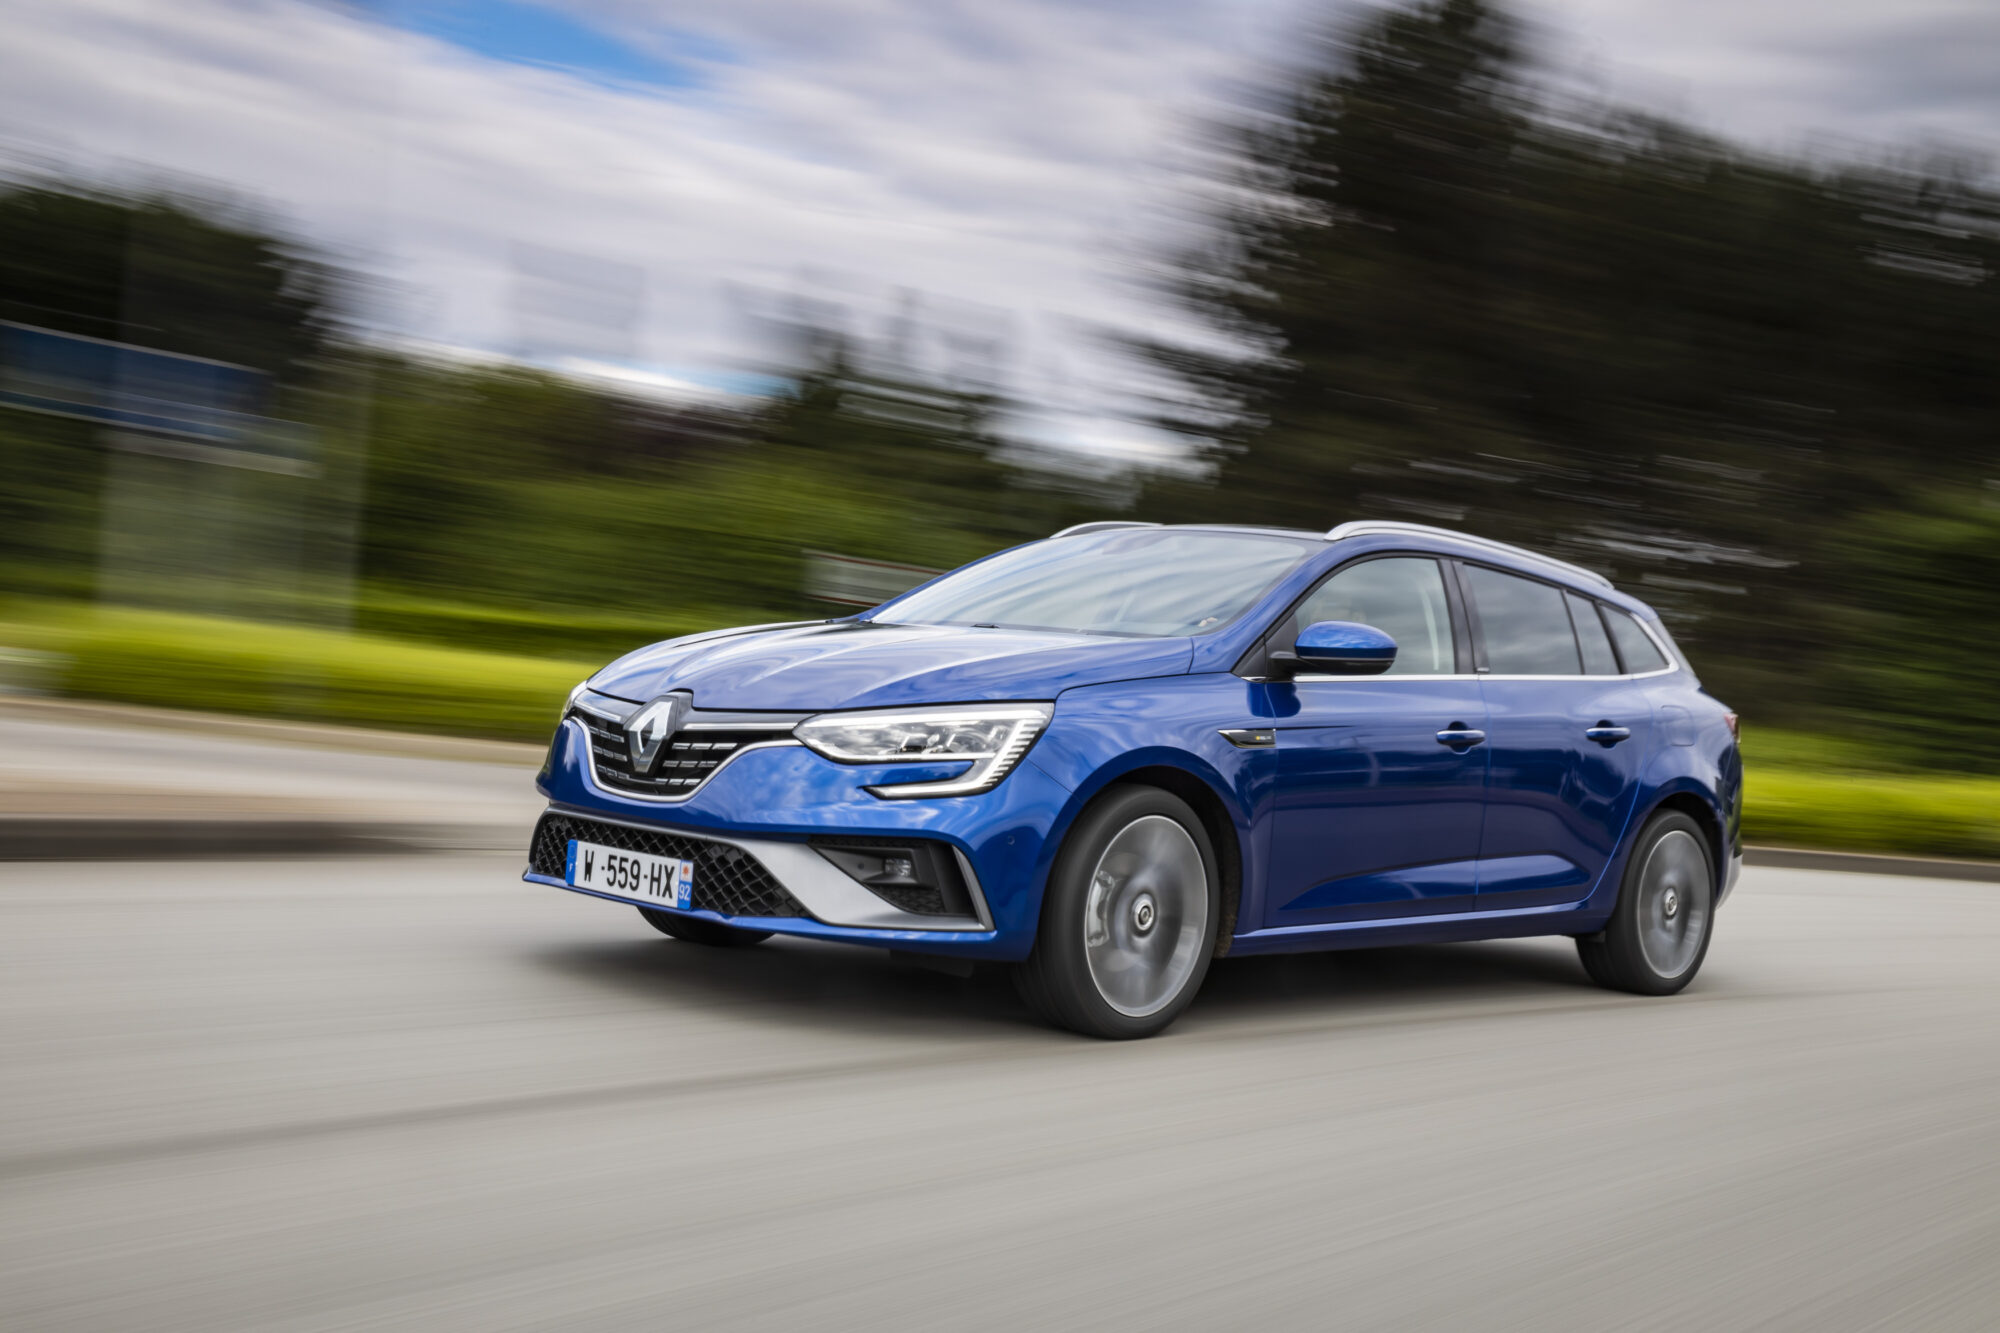 2020 - New Renault MEGANE E-TECH Plug-in tests drive